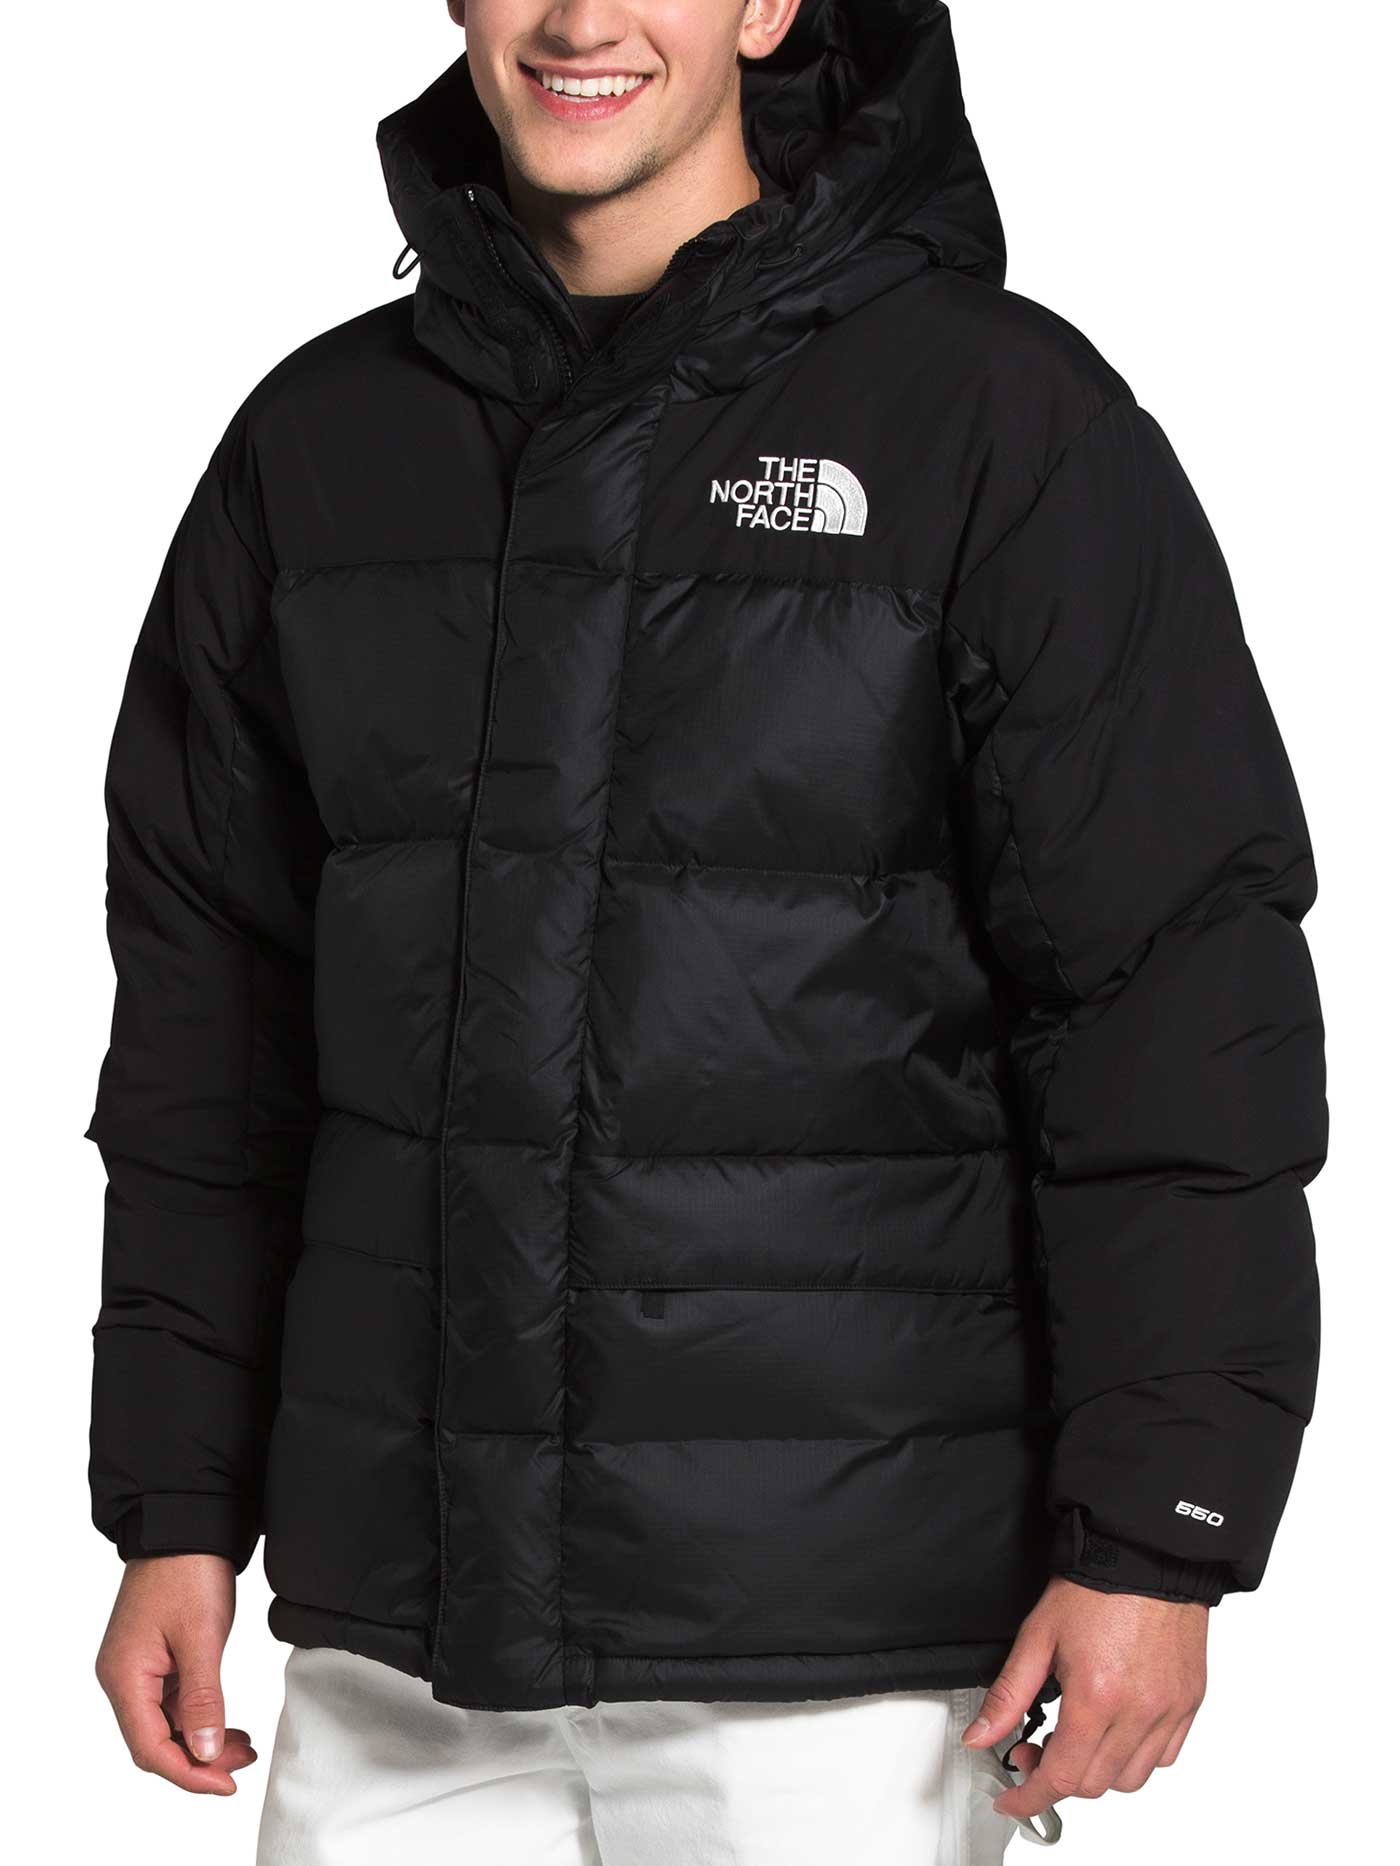 The North Face Winter 2022 HMLYN Down Parka Jacket